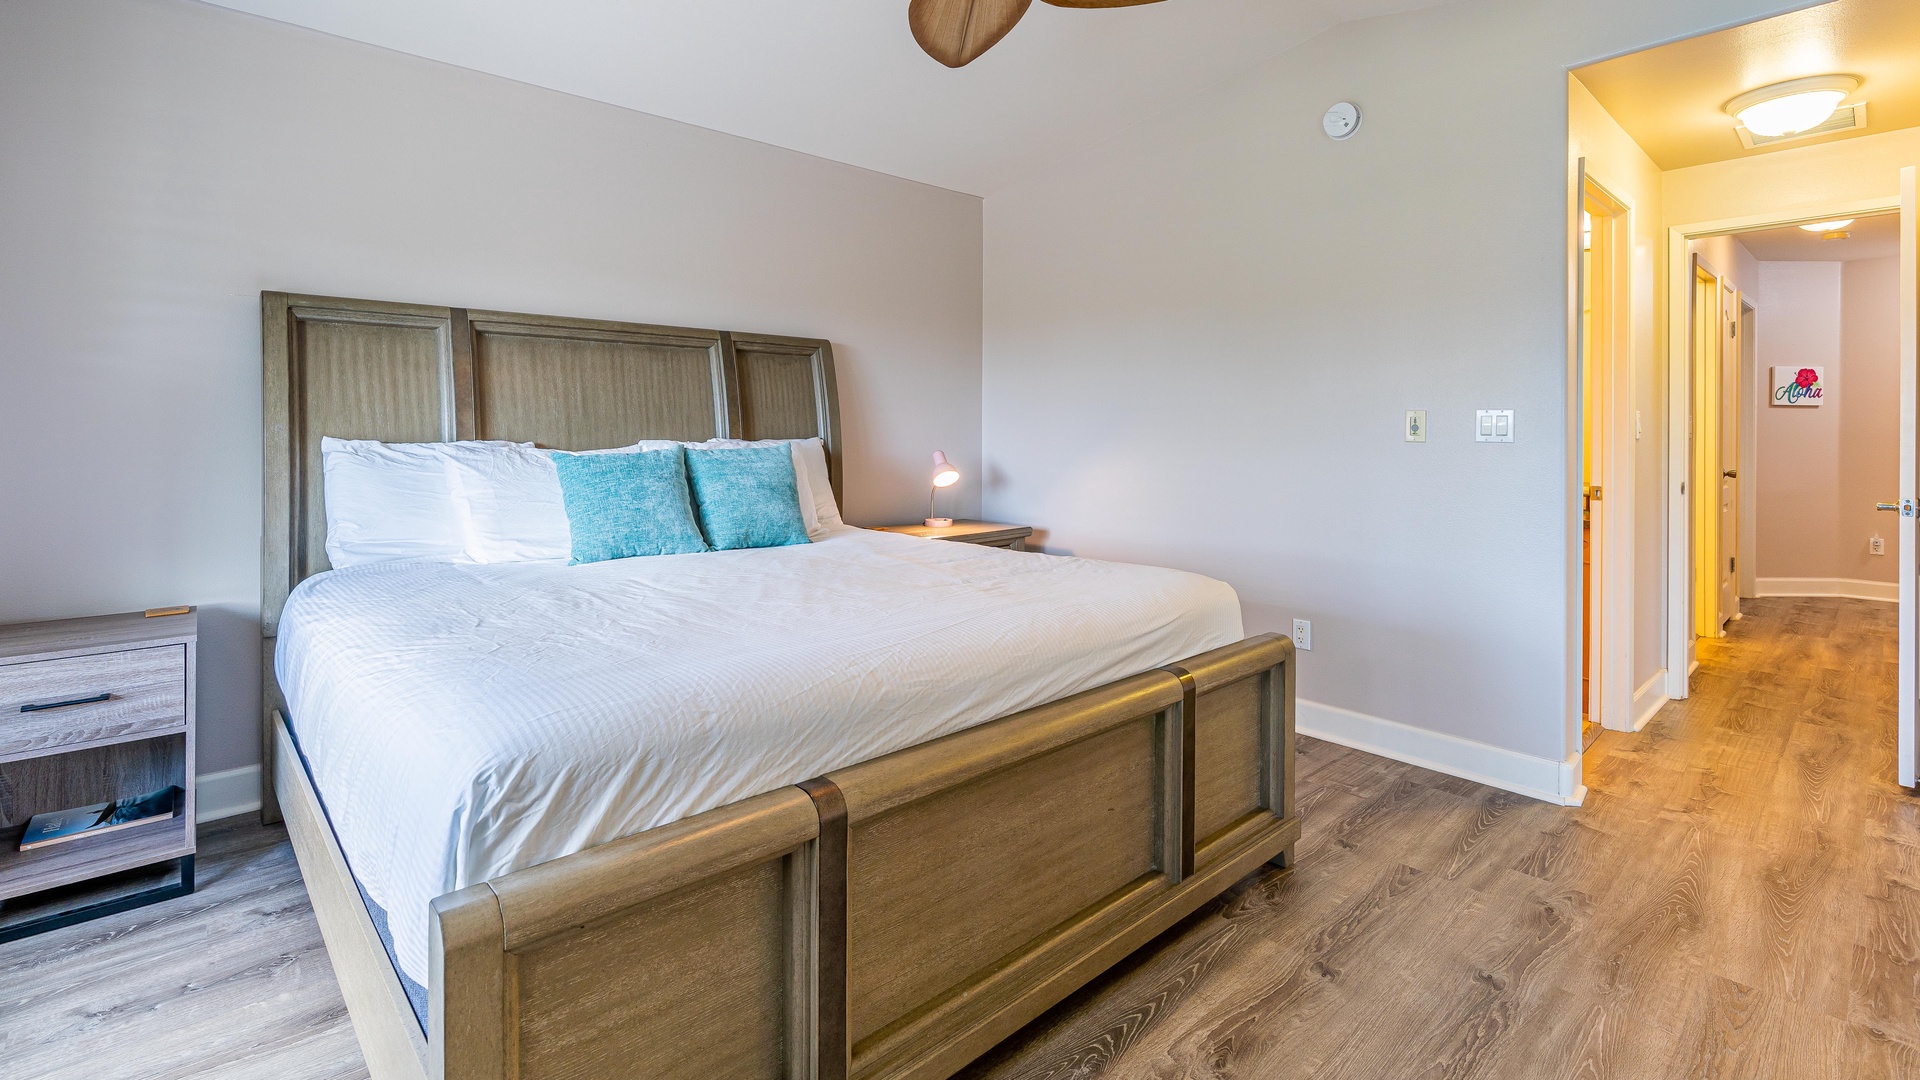 Kapolei Vacation Rentals, Hillside Villas 1508-2 - The primary guest bedroom is comfortable and spacious for a restful slumber.